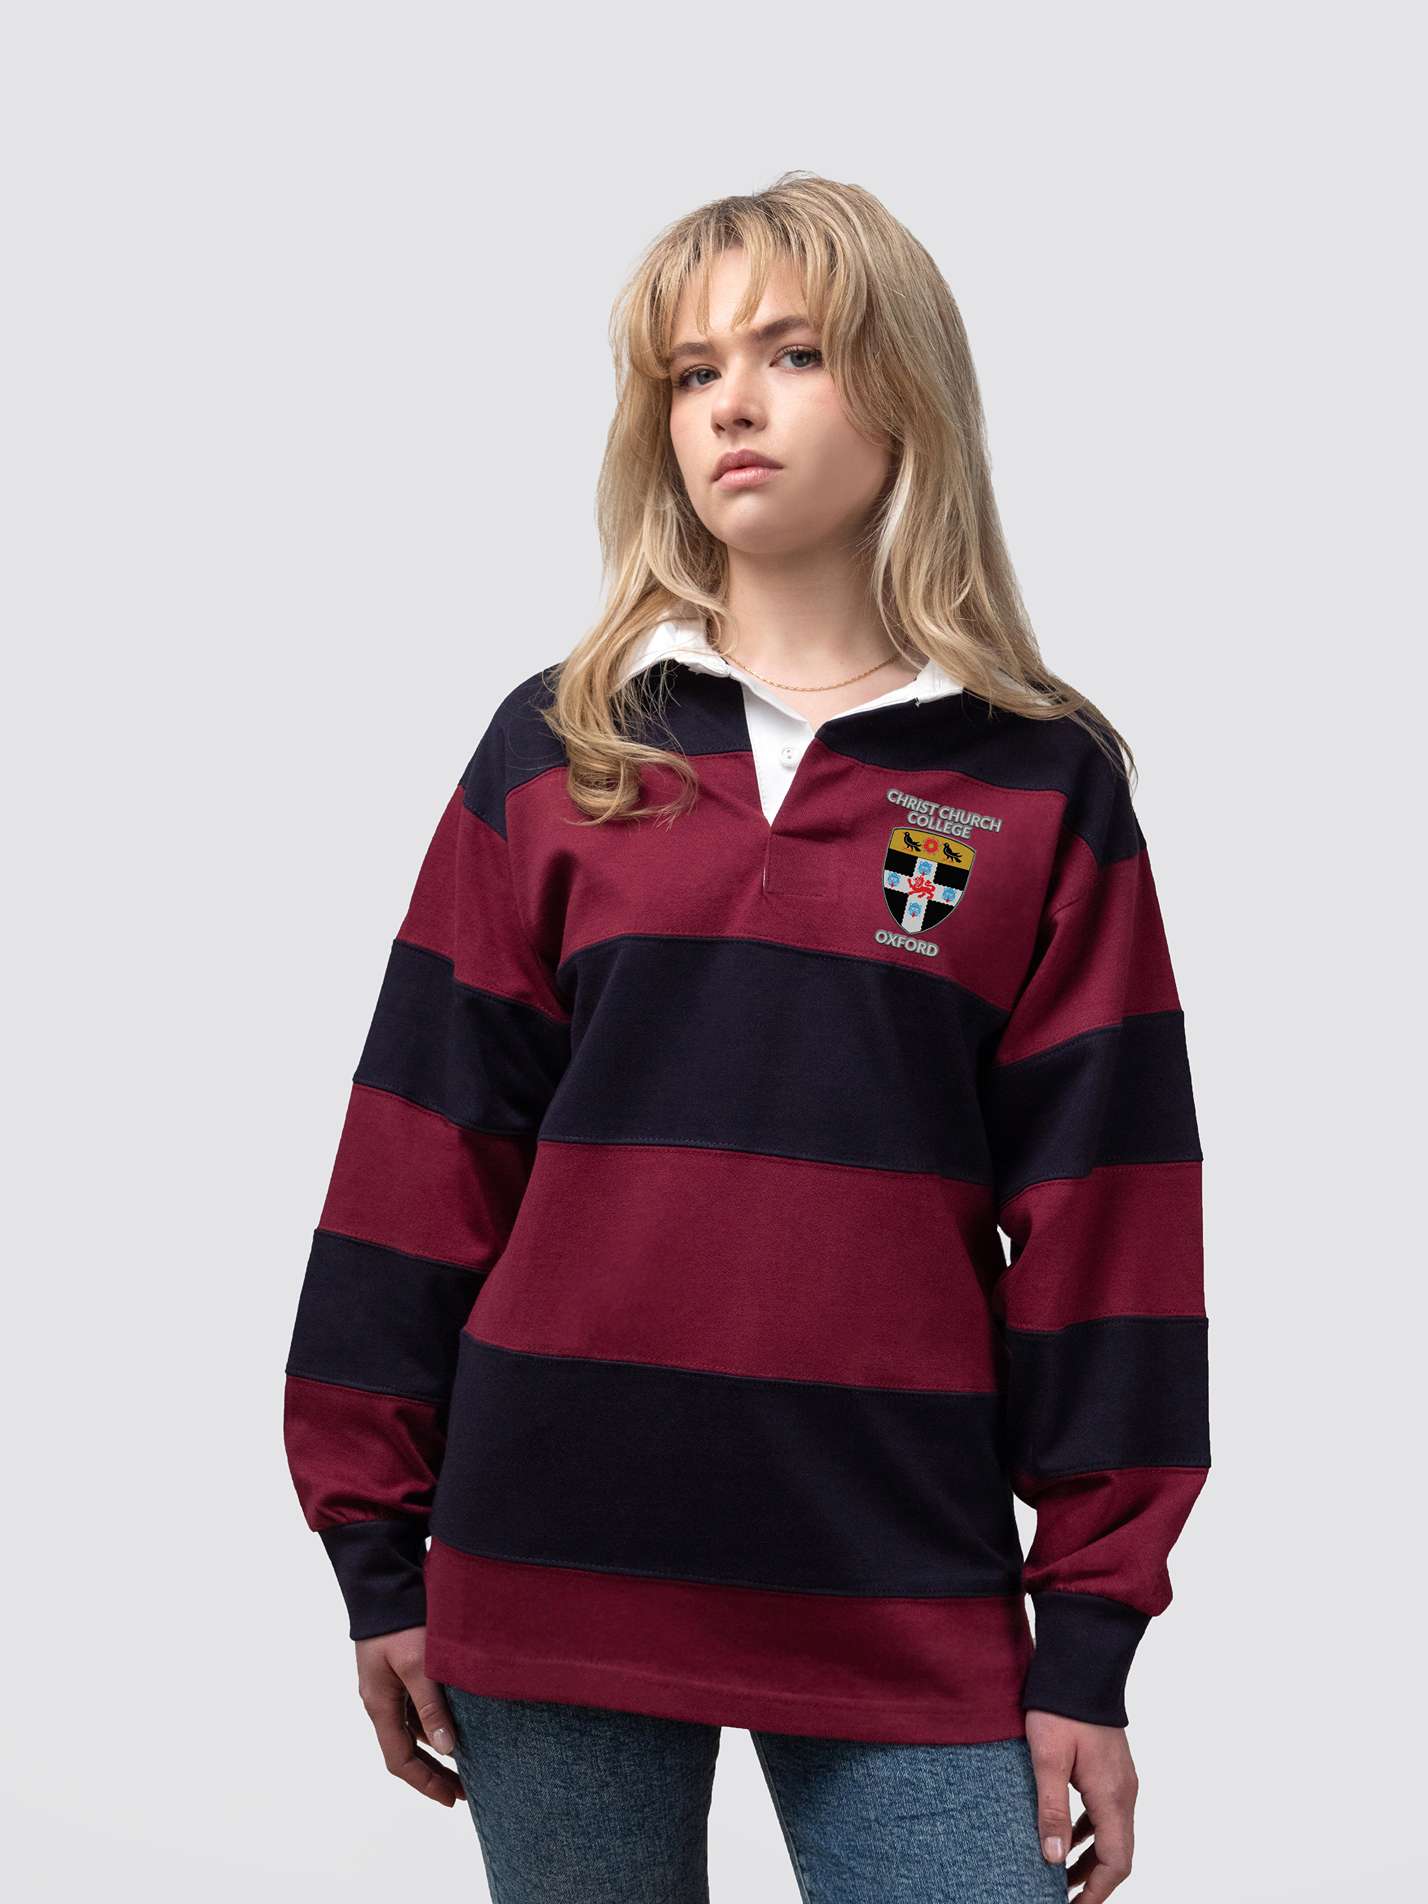 Christ Church College rugby shirt, with burgundy and navy stripes